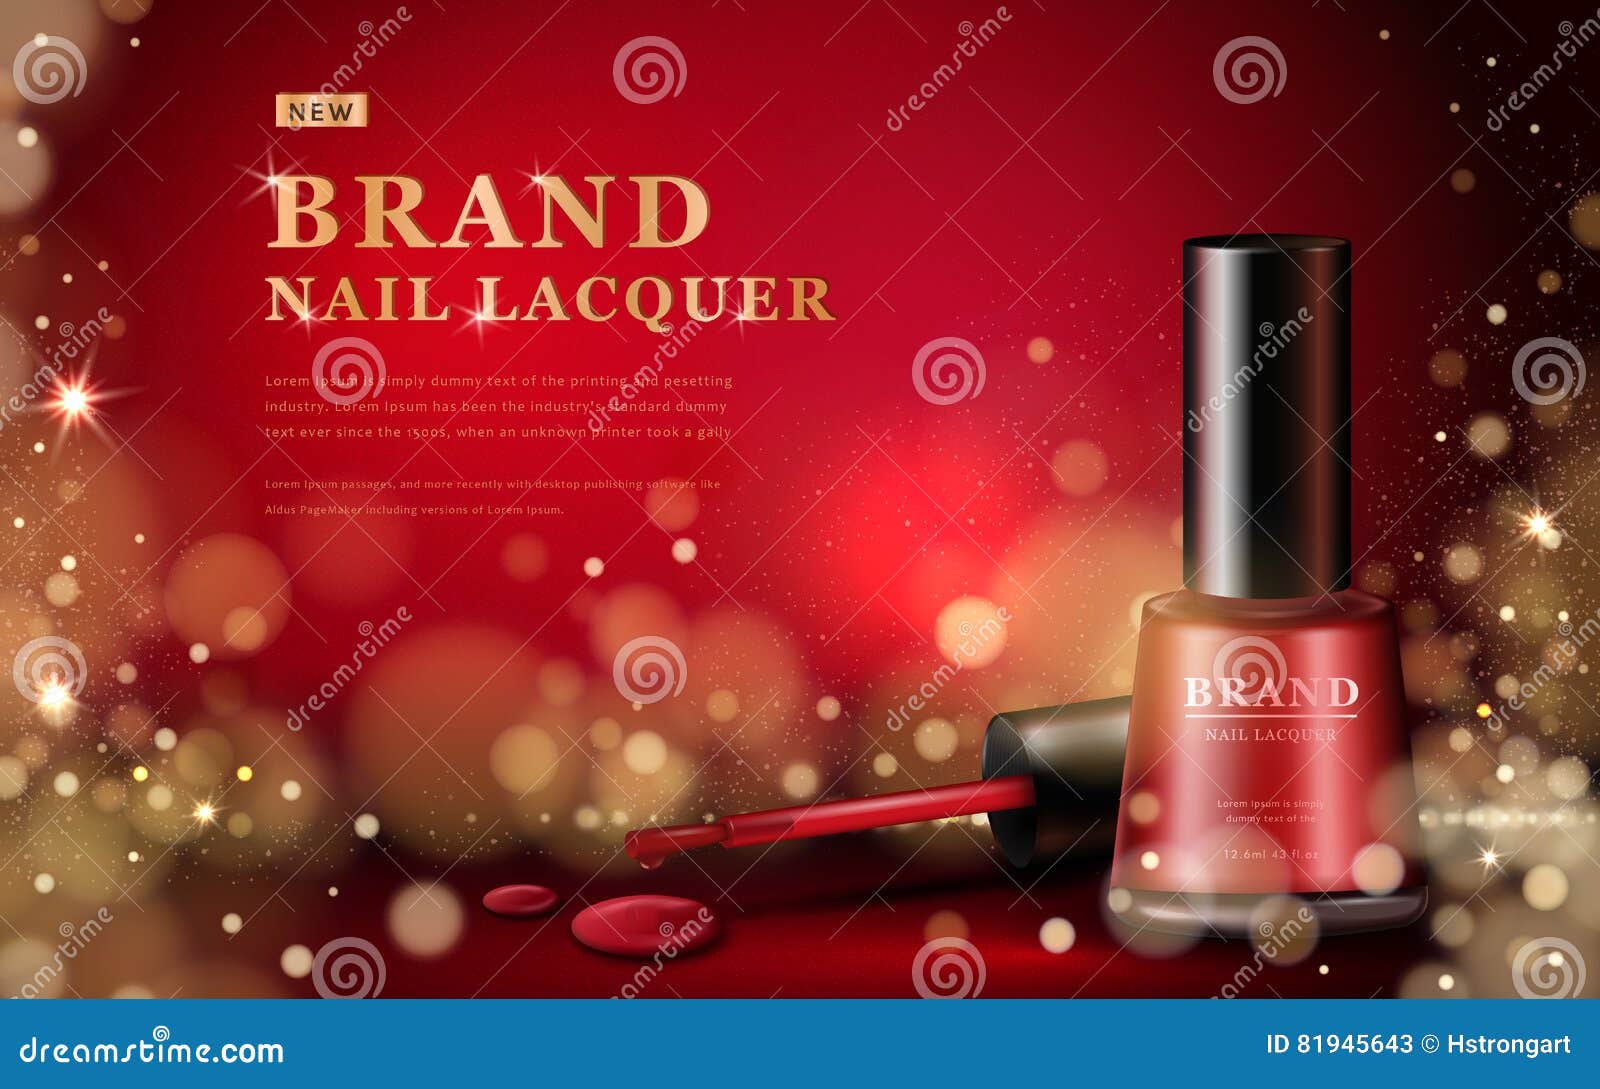 red nail lacquer ads